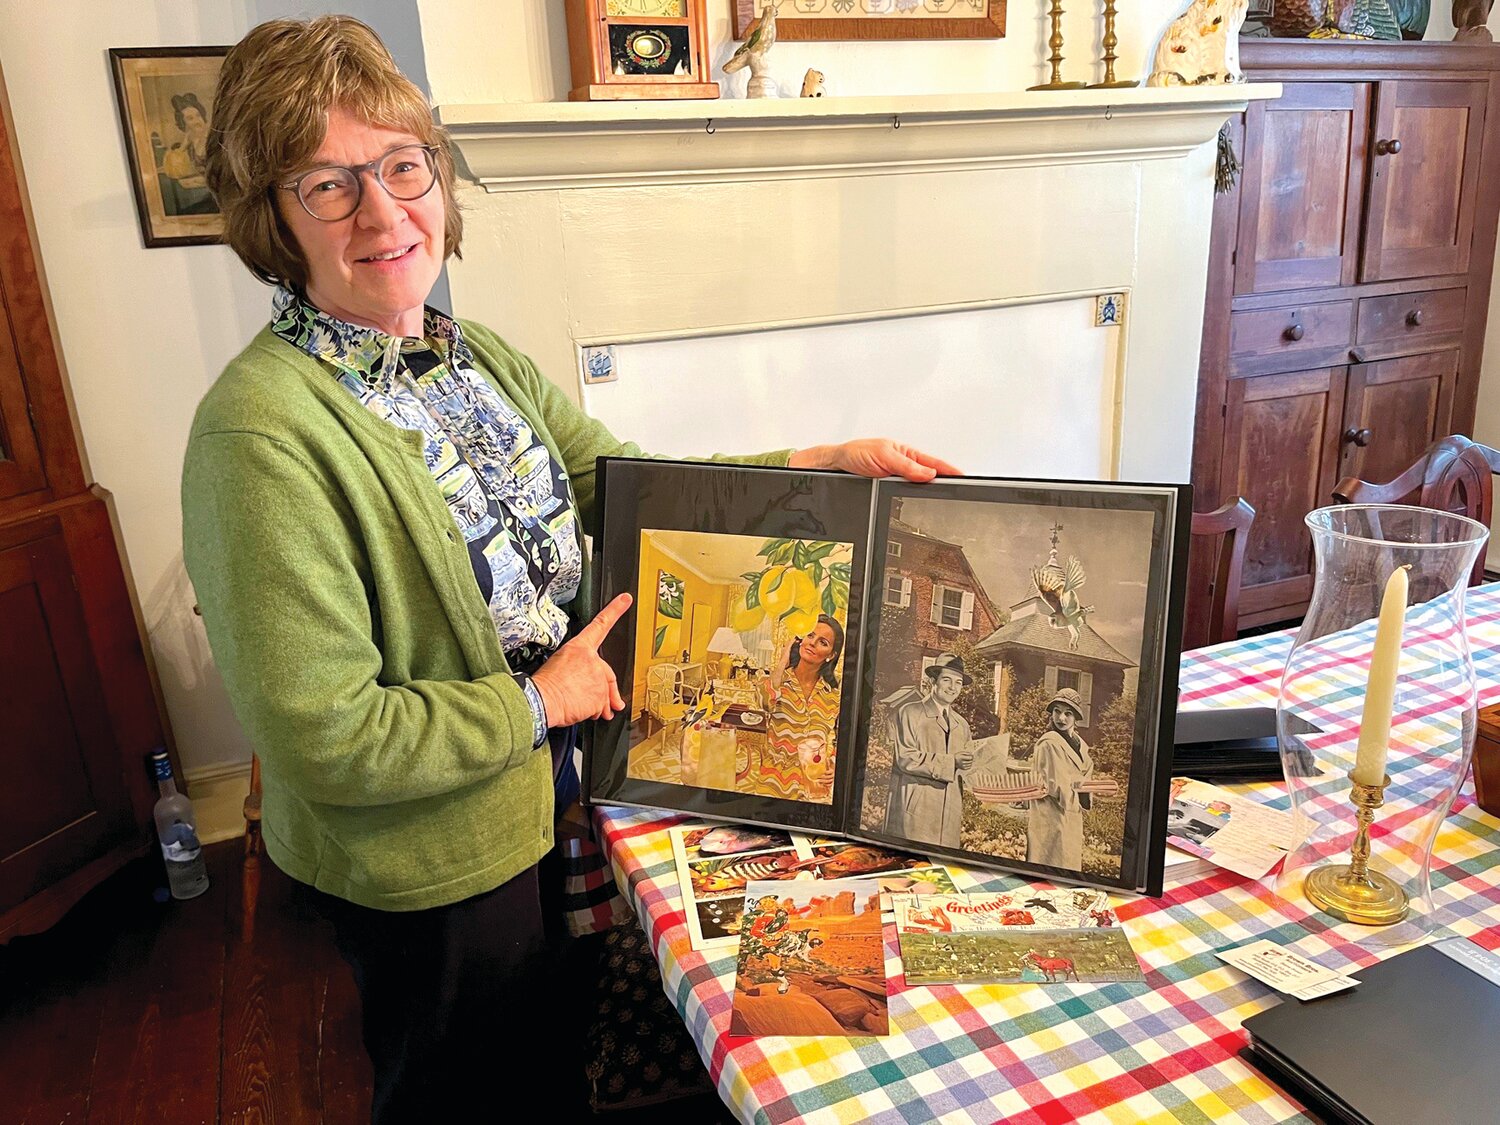 Kathy Brown displays one of many books she has of her decoupage artwork.